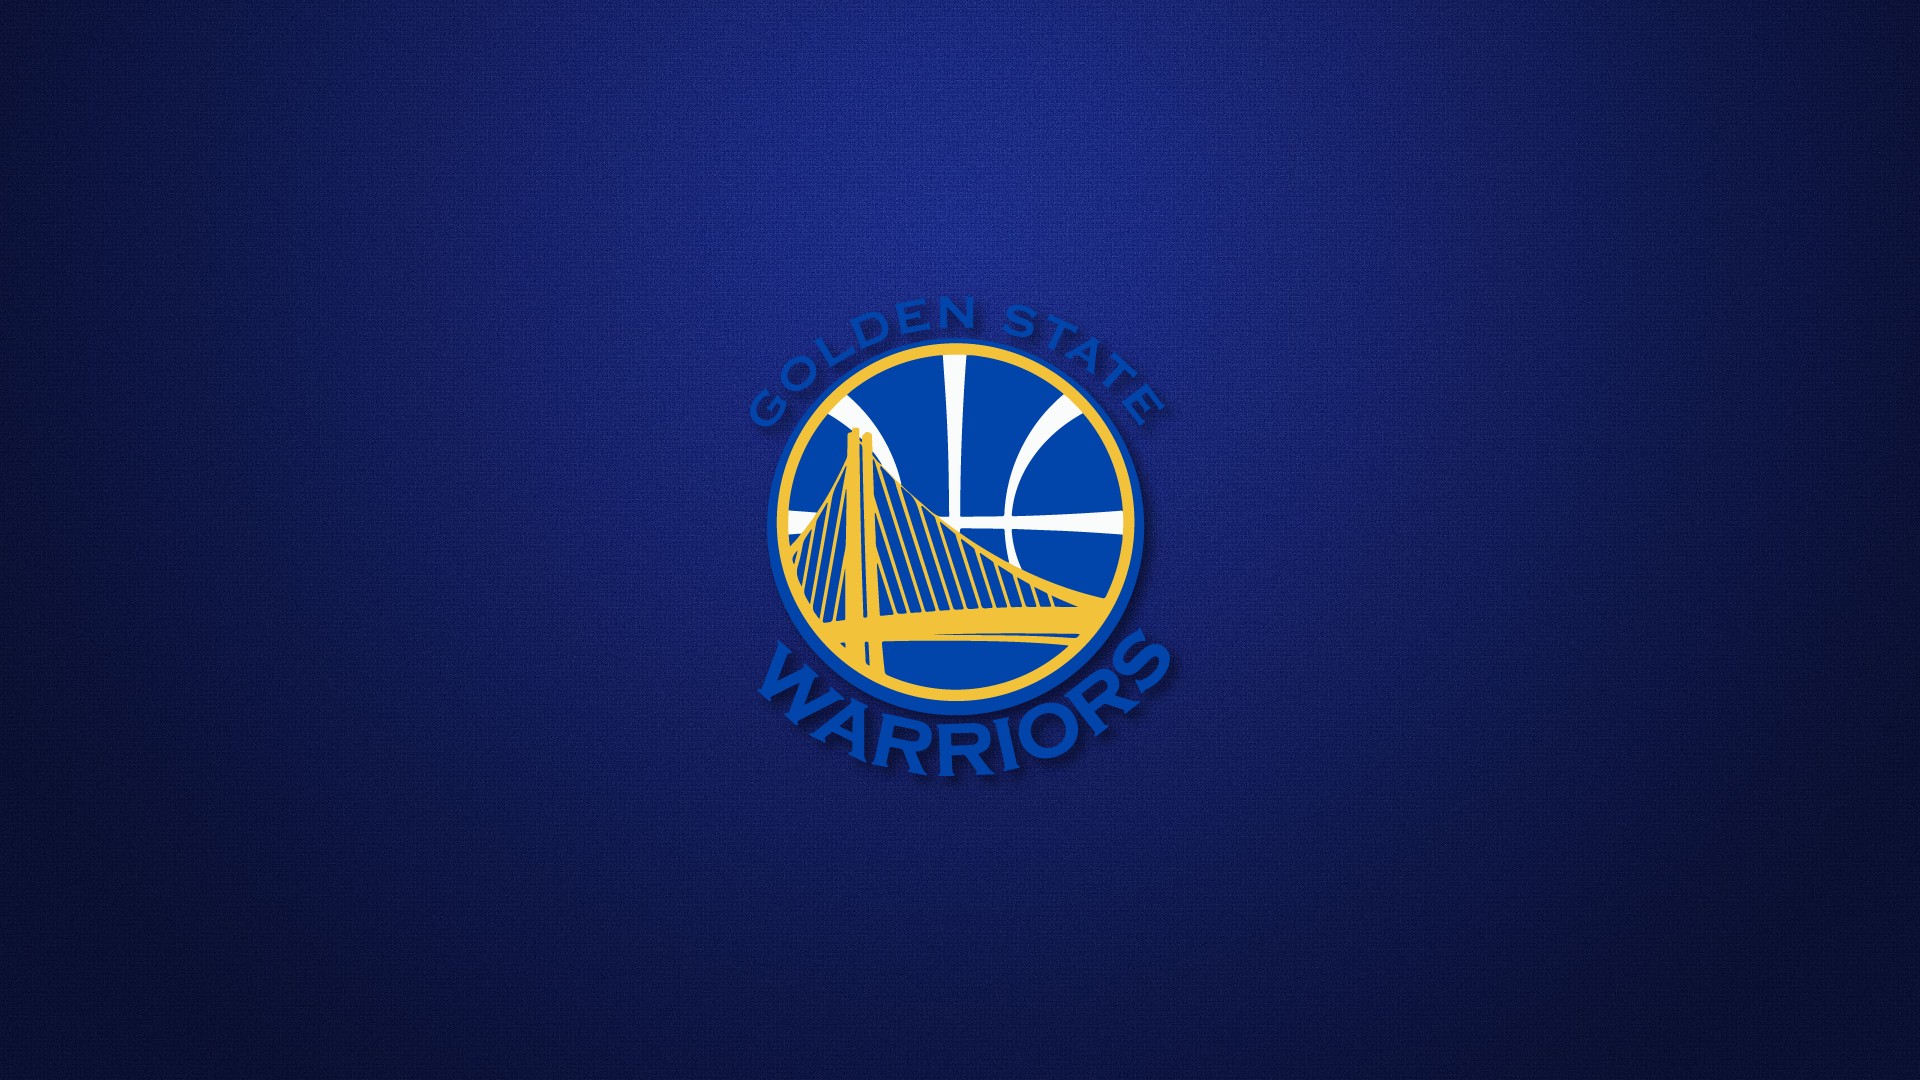 Golden State Basketball Wallpaper HD with high-resolution 1920x1080 pixel. You can use this wallpaper for your Desktop Computer Backgrounds, Windows or Mac Screensavers, iPhone Lock screen, Tablet or Android and another Mobile Phone device